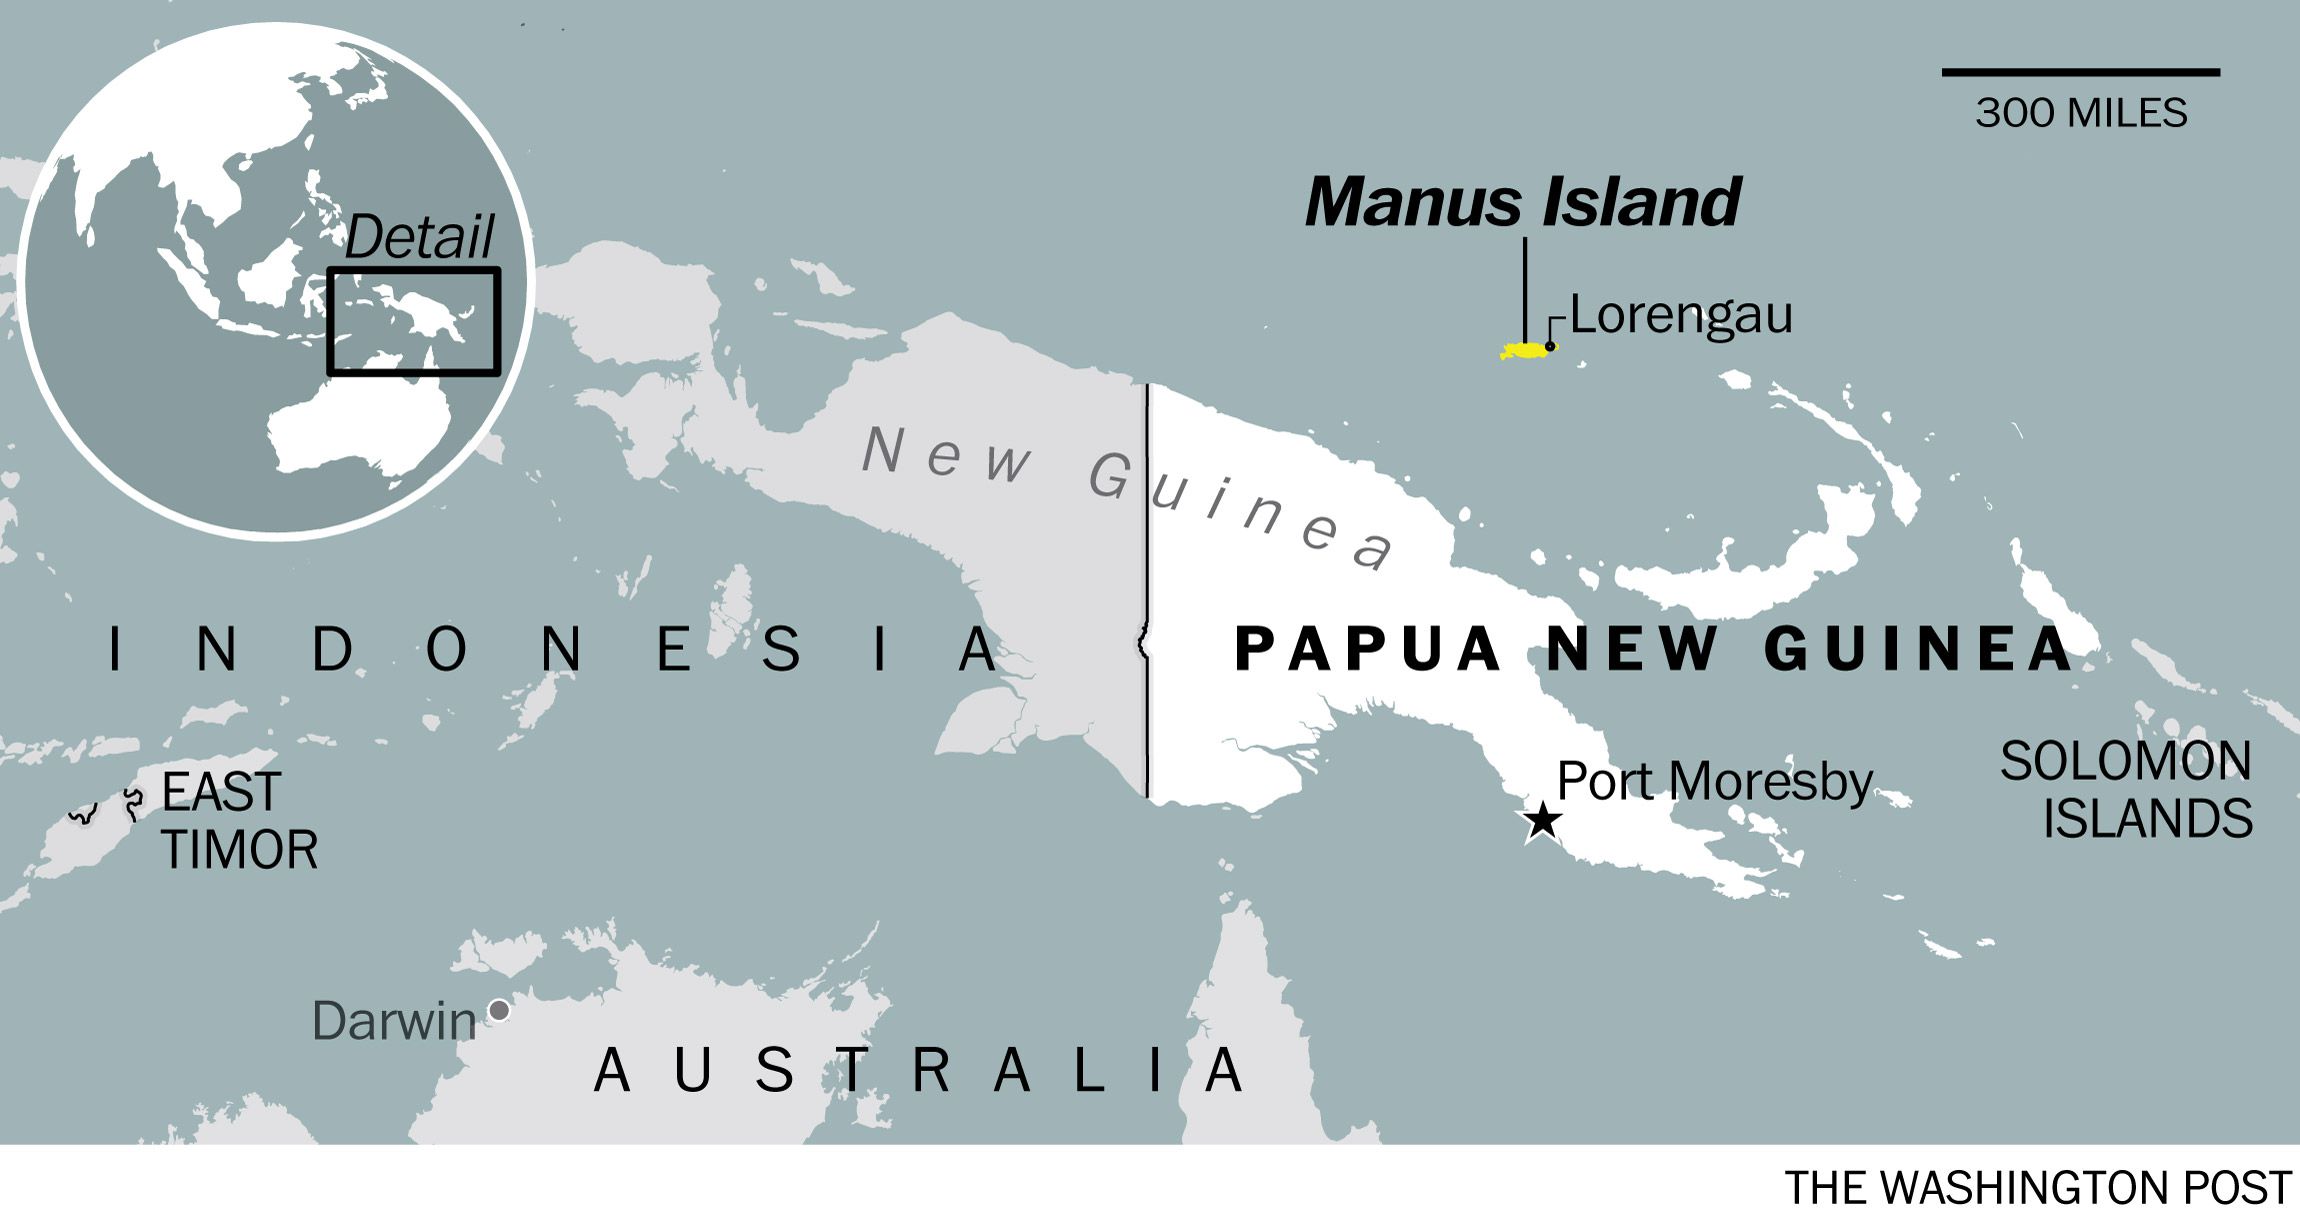 Lav aftensmad træt af Morse kode One of Australia's notorious refugee camps has become an economic crutch  for Papua New Guinea island - The Washington Post